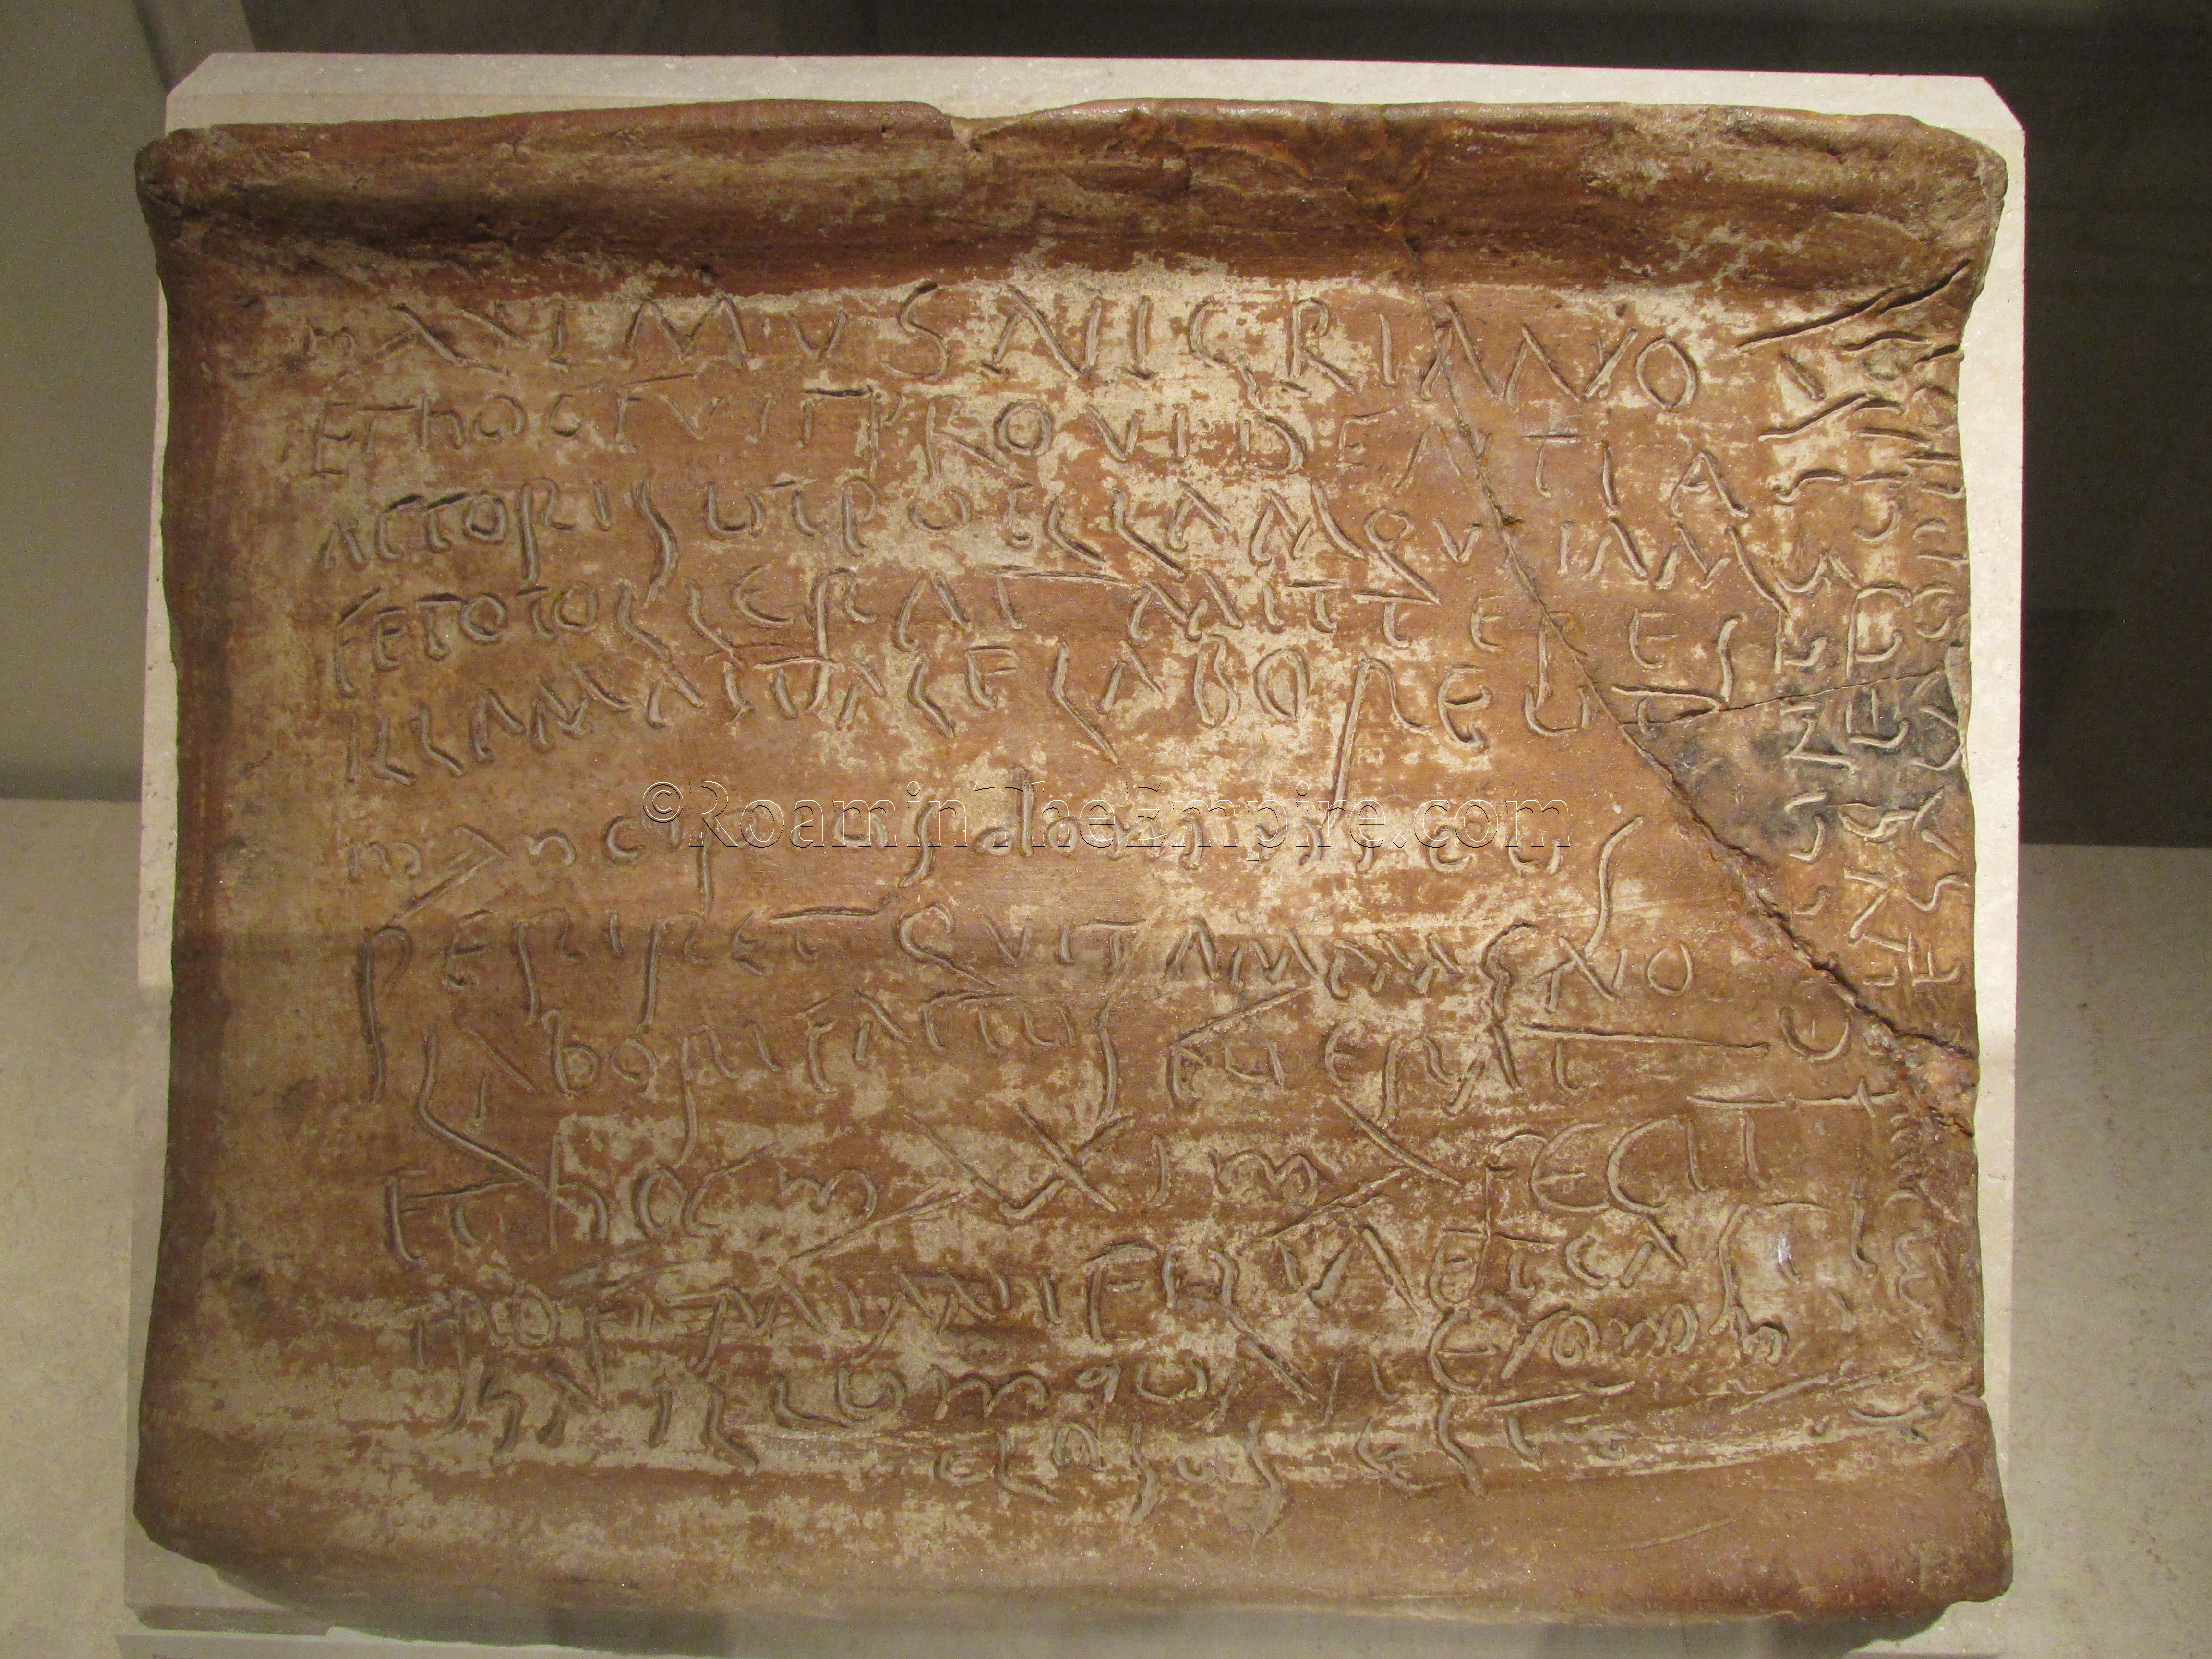 Tablet letter between Maximus and Nigrianus.